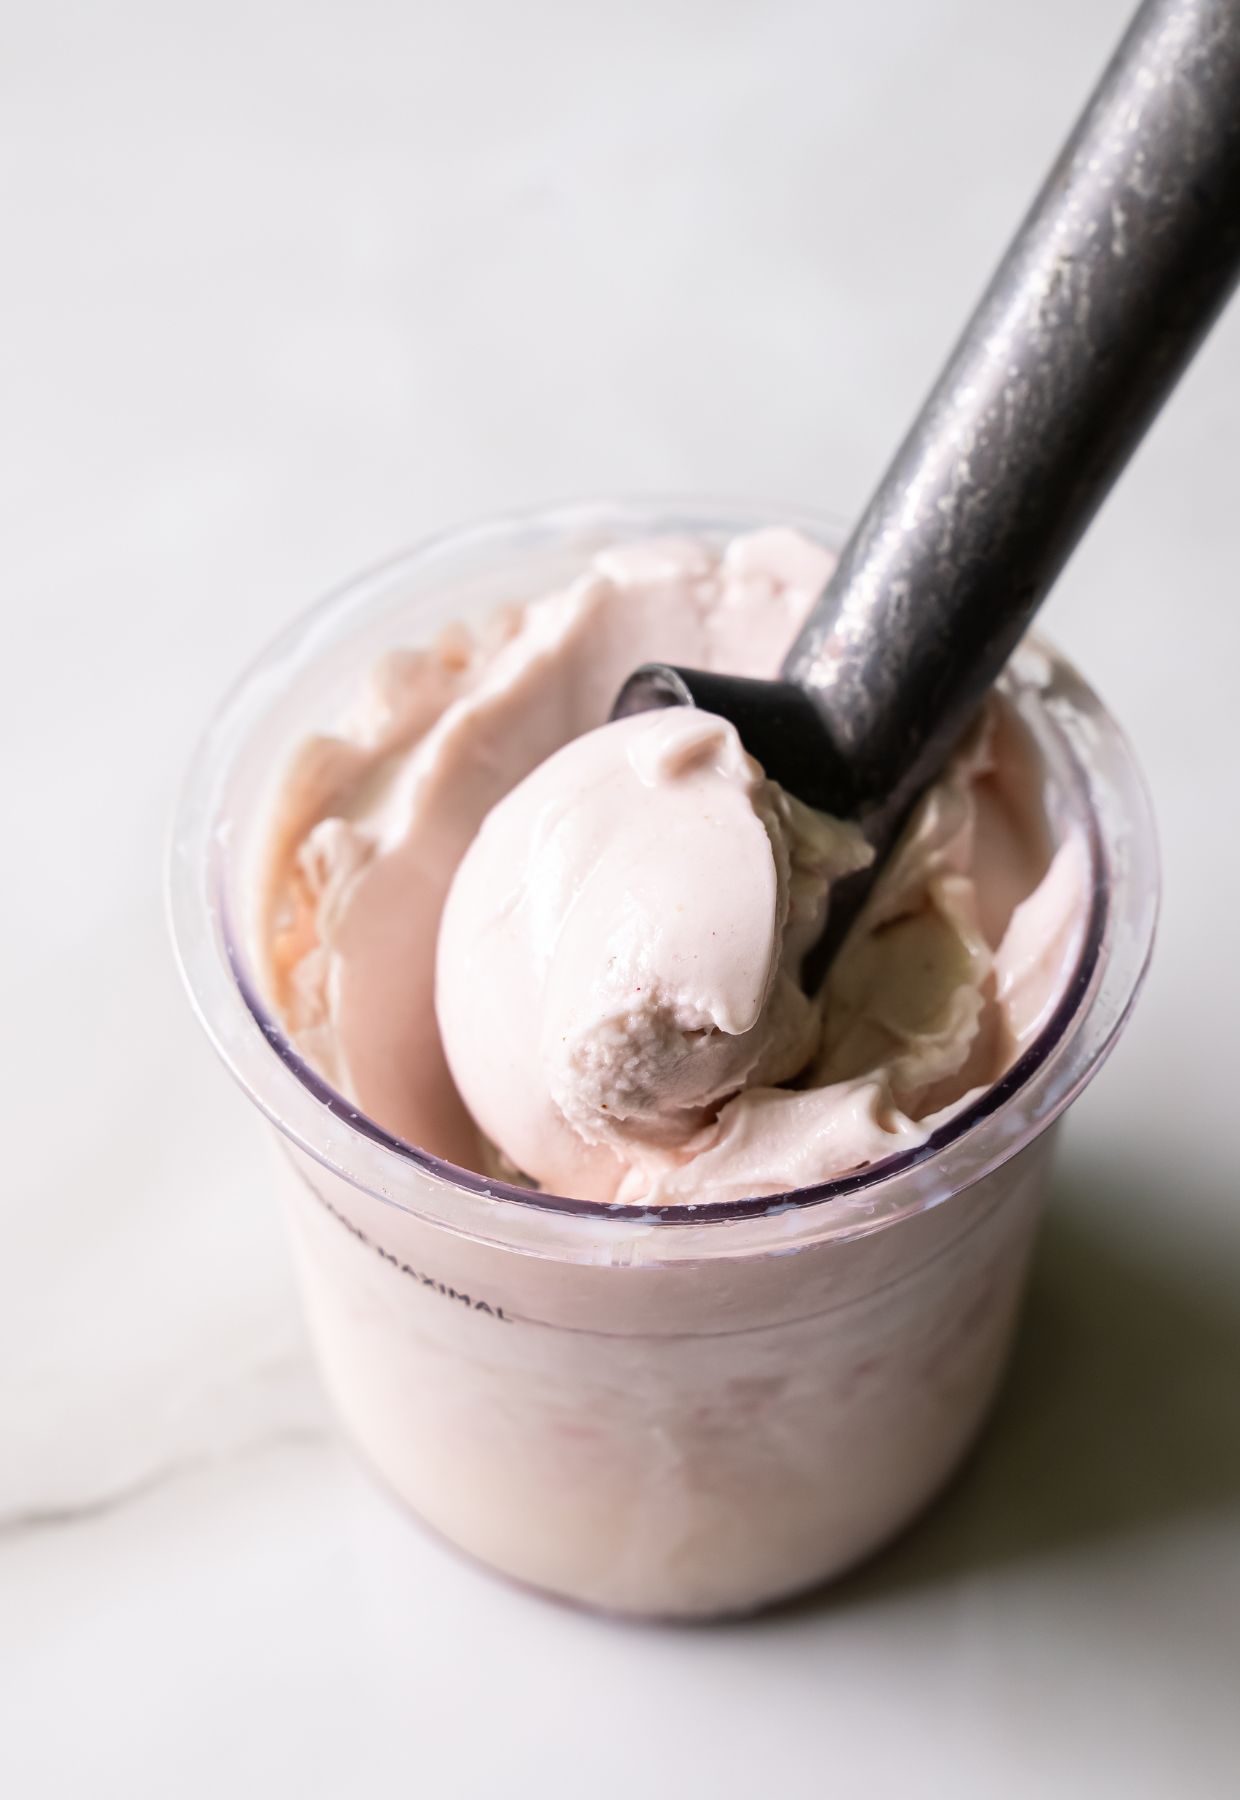 A metal ice cream scoop placed in a container of creamy pink ice cream.